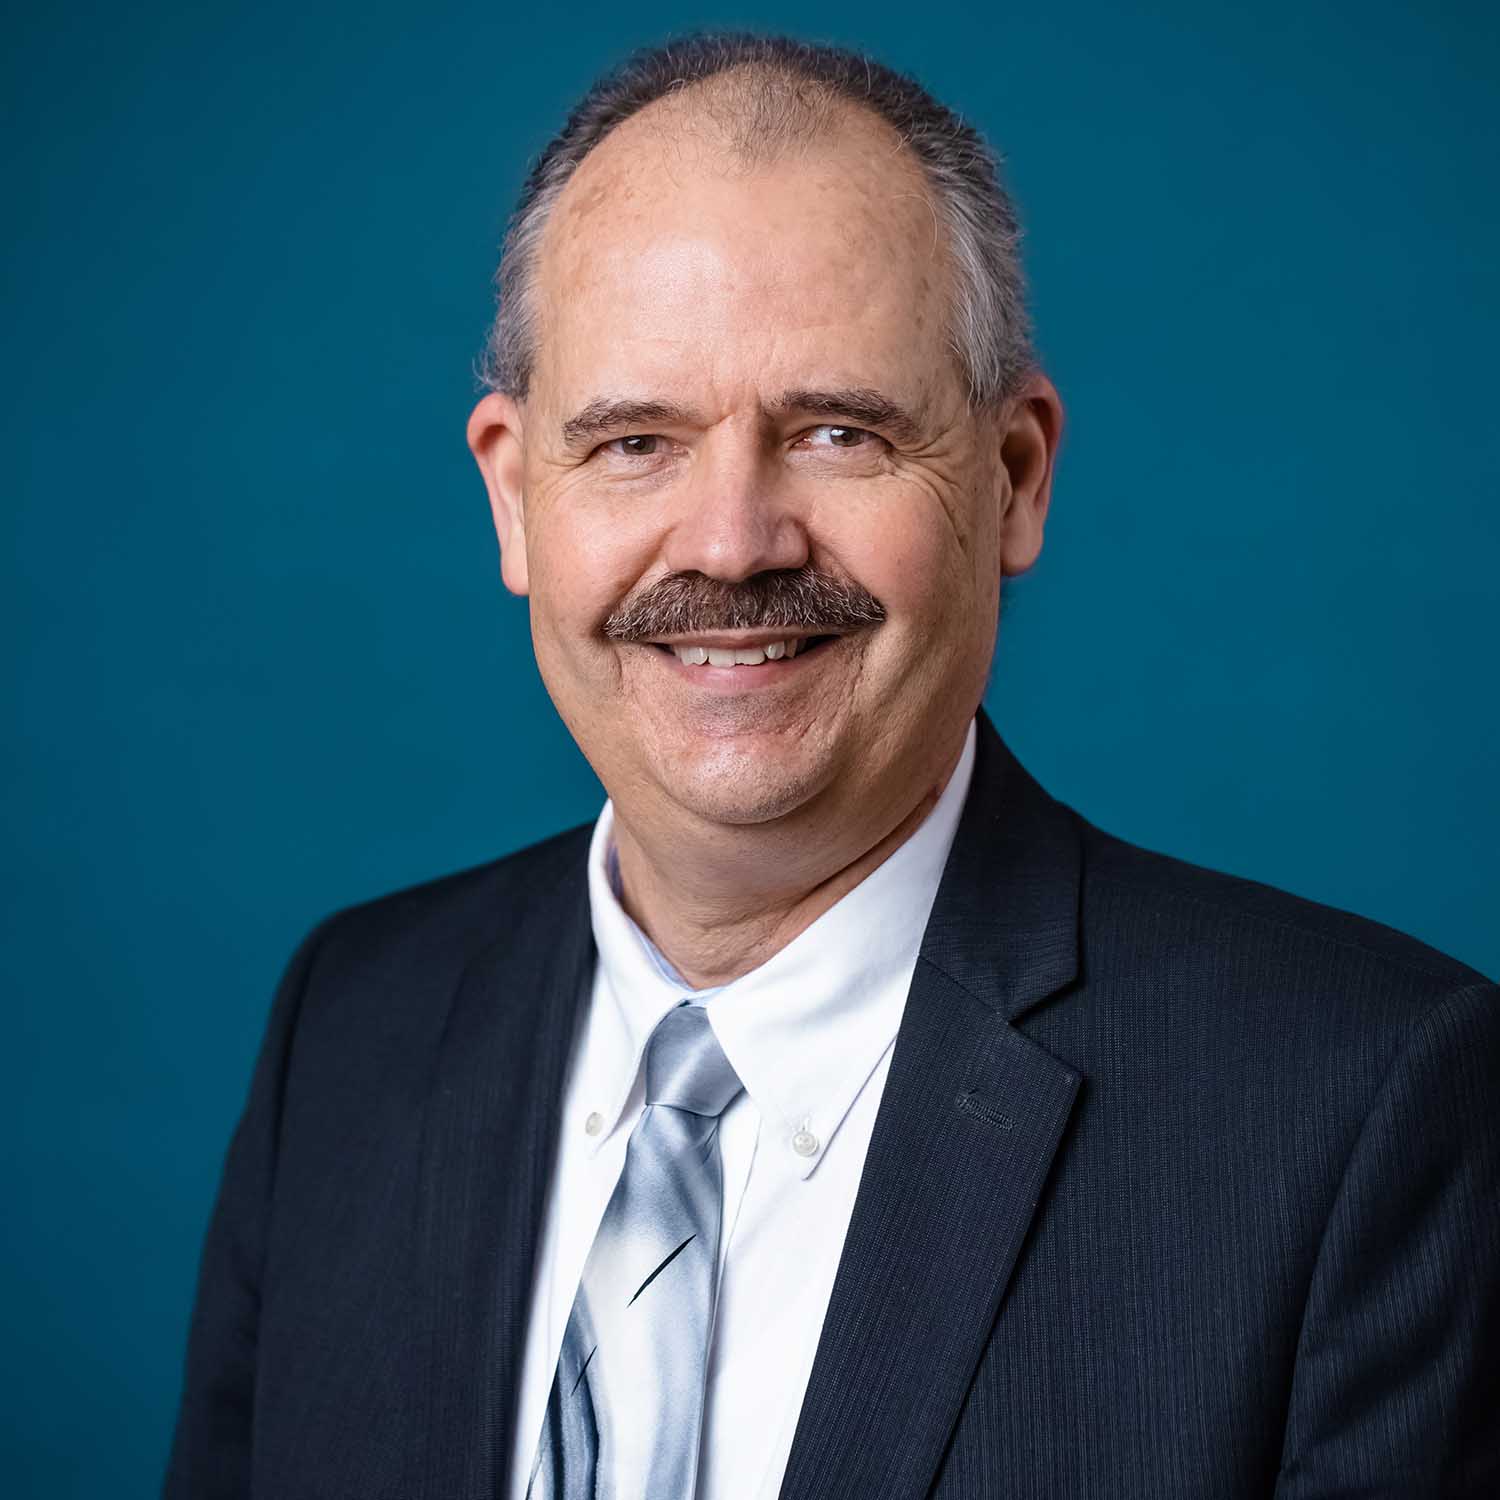 Photo of LeRoy Heizelman, Chief Financial Officer for Union State Bank.